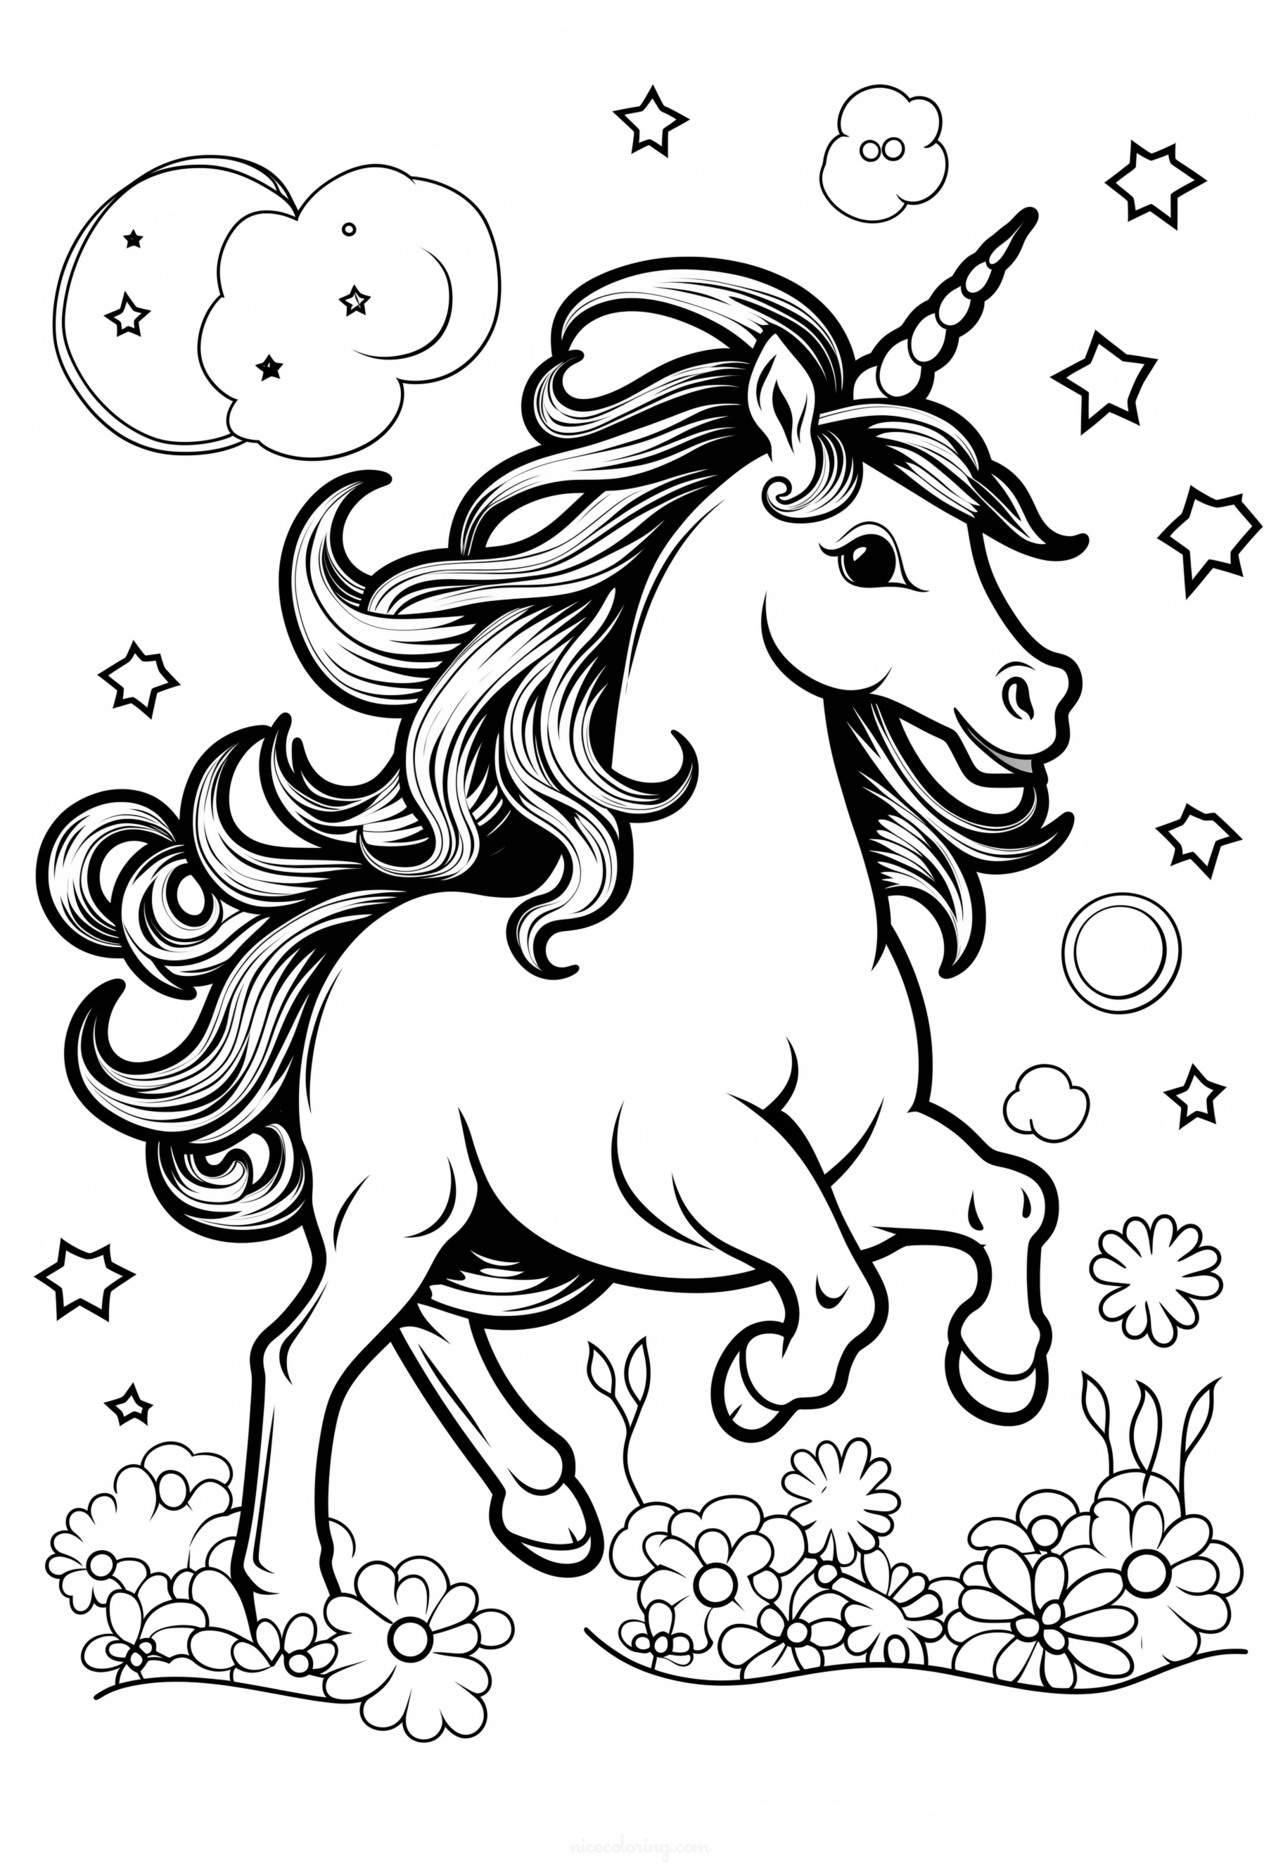 A majestic unicorn in a mystical forest coloring page